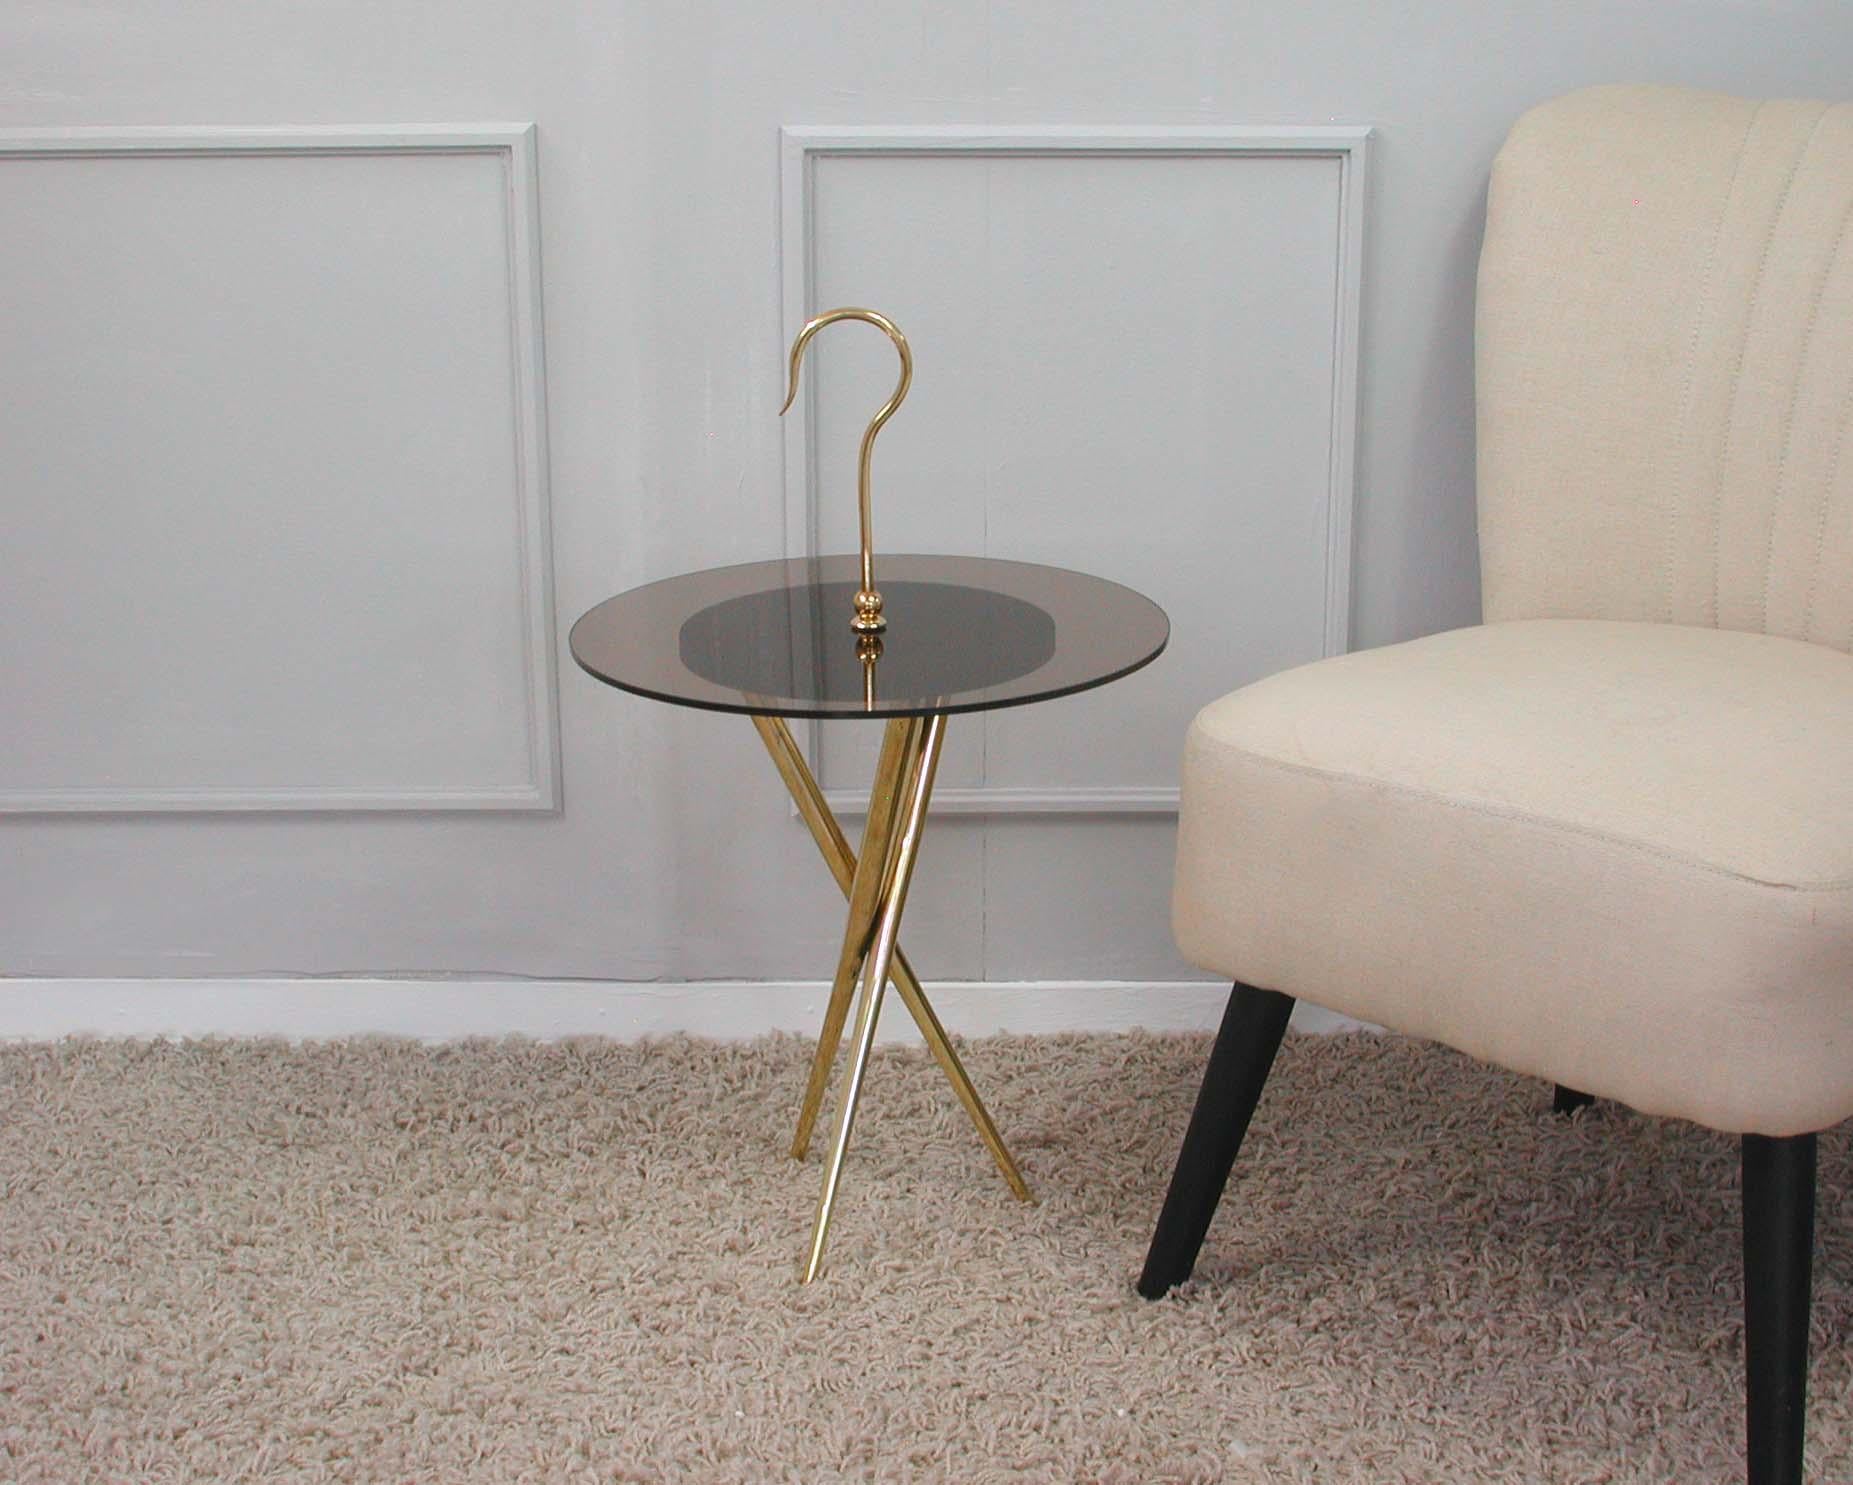 Italian Midcentury Brass and Tinted Glass Occasional Table, 1950s For Sale 6